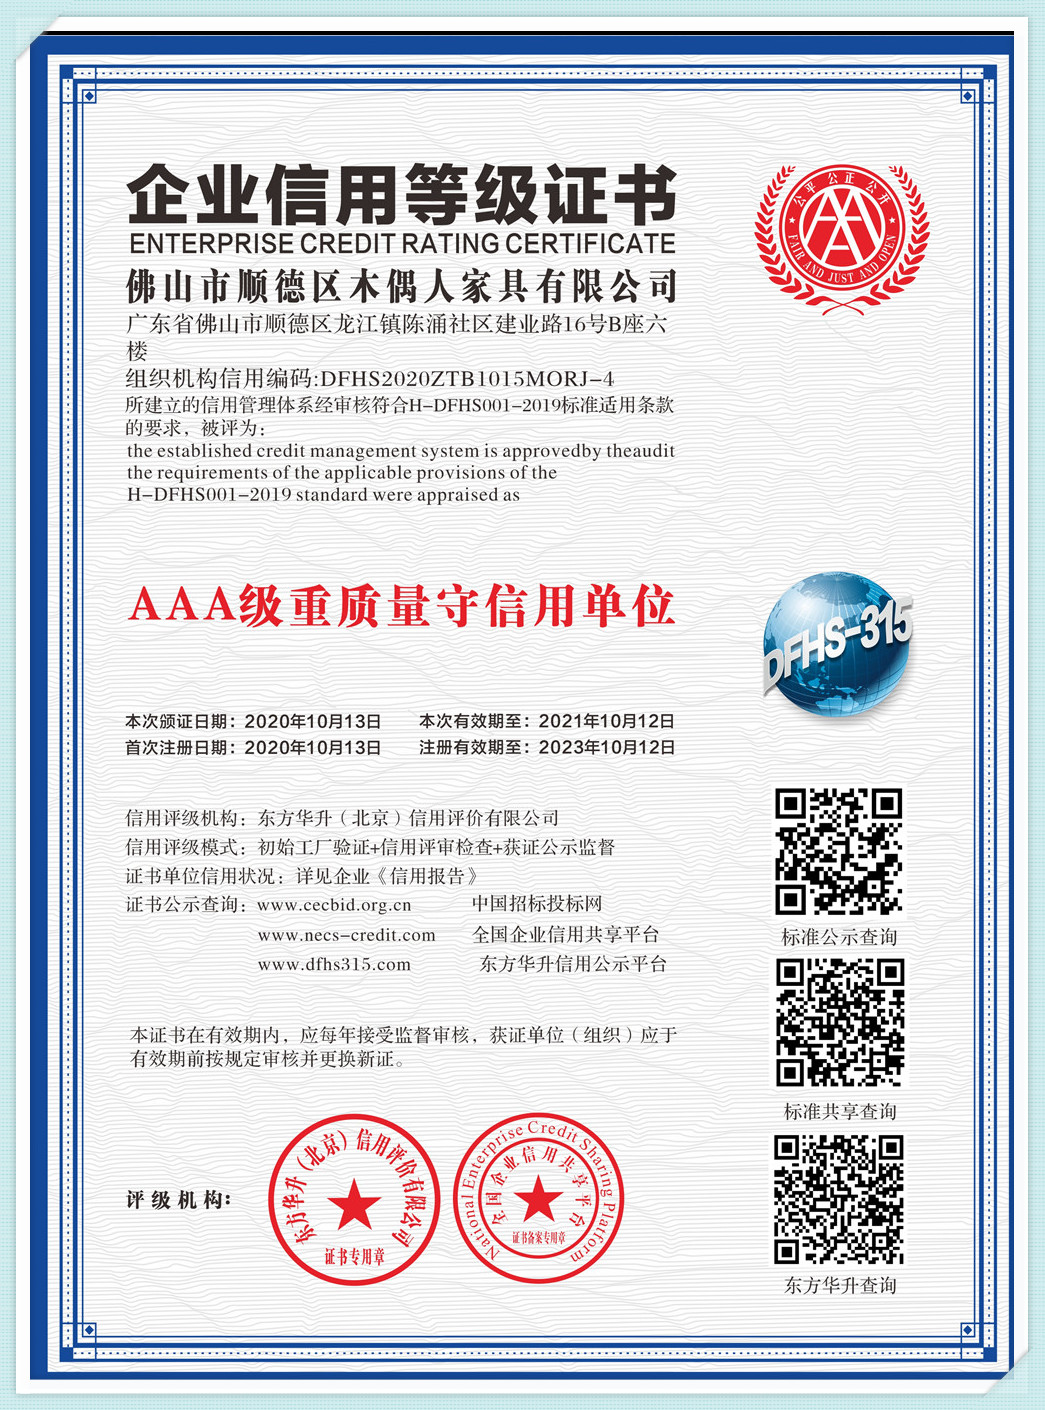 AAA Grade Quality And Trustworthy Enterprise